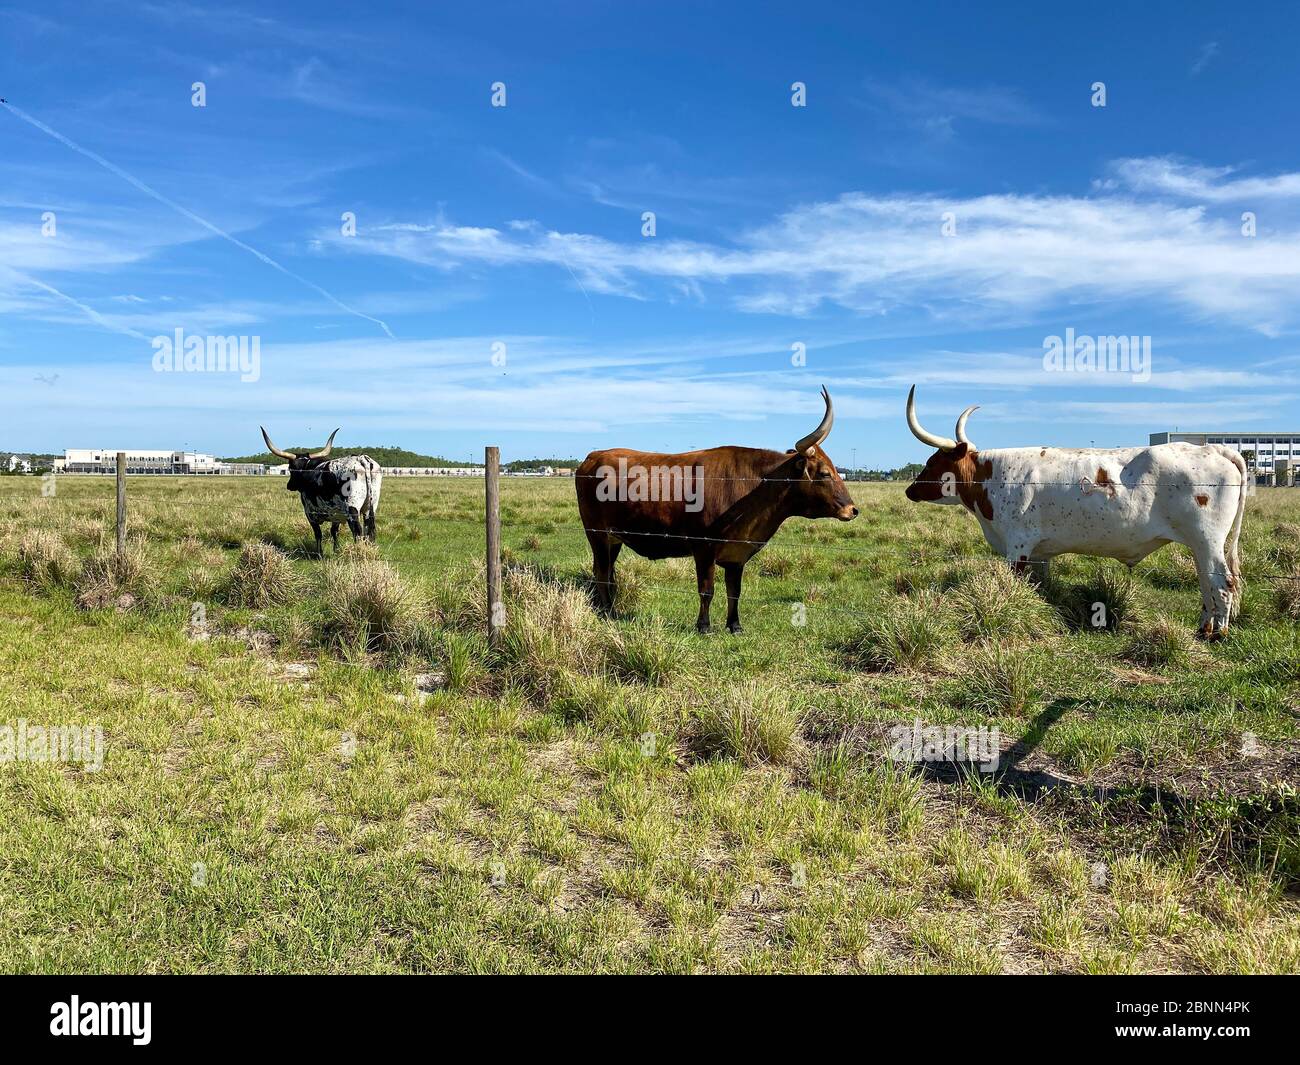 Longhorn Cattle grazing in a pasture in the Laureate Park neighborhood of Lake Nona in Orlando, Florida. Stock Photo